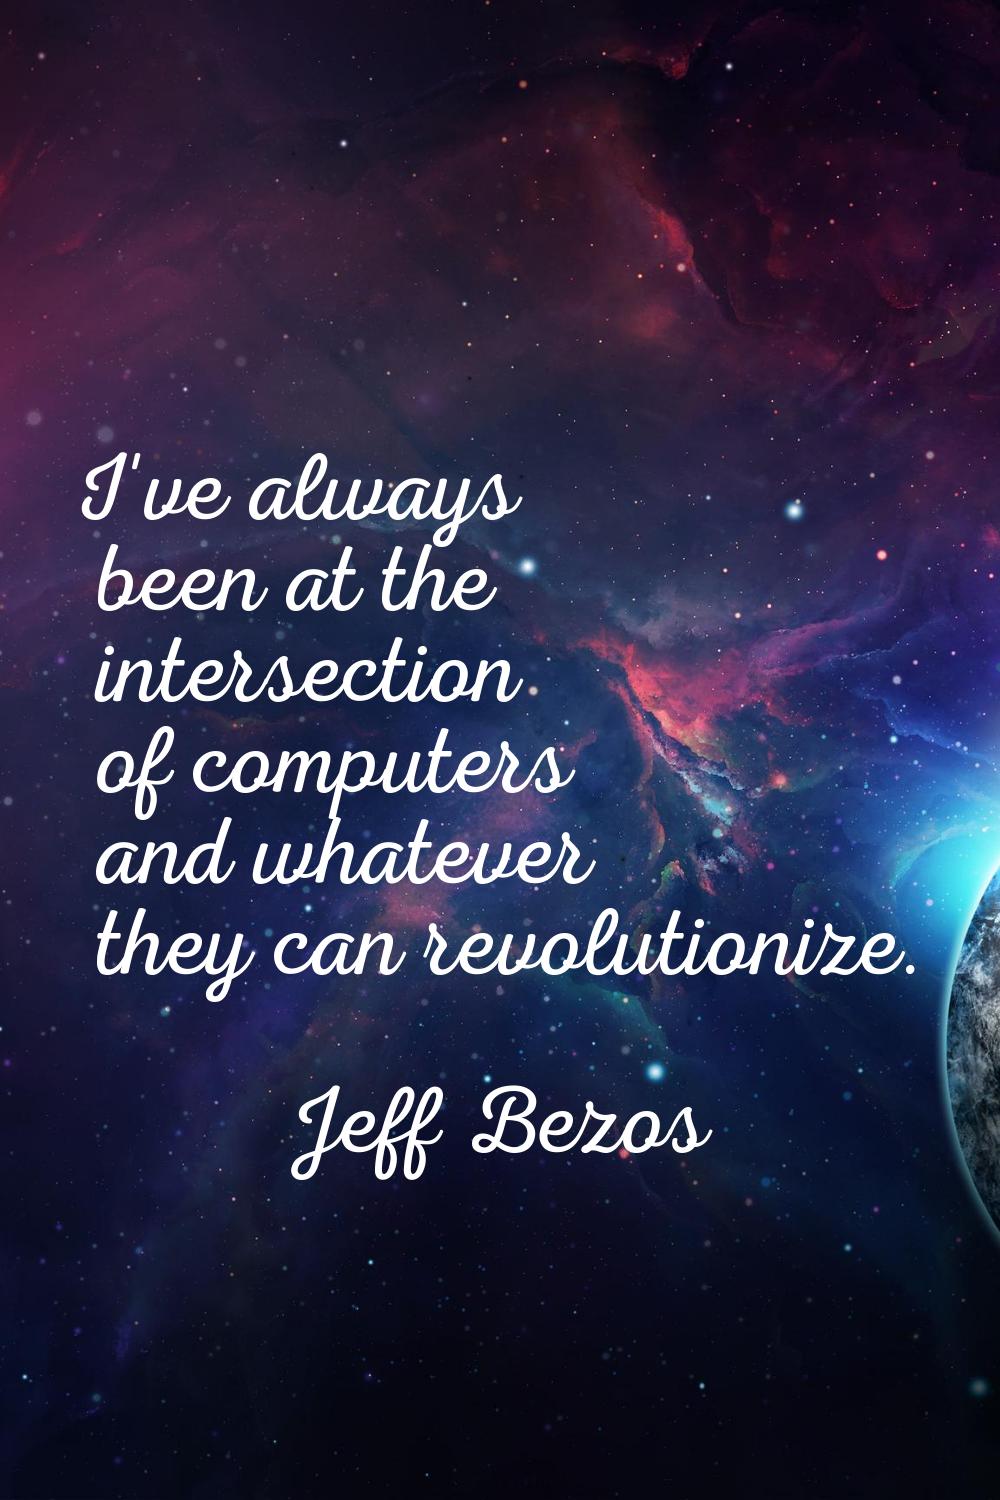 I've always been at the intersection of computers and whatever they can revolutionize.